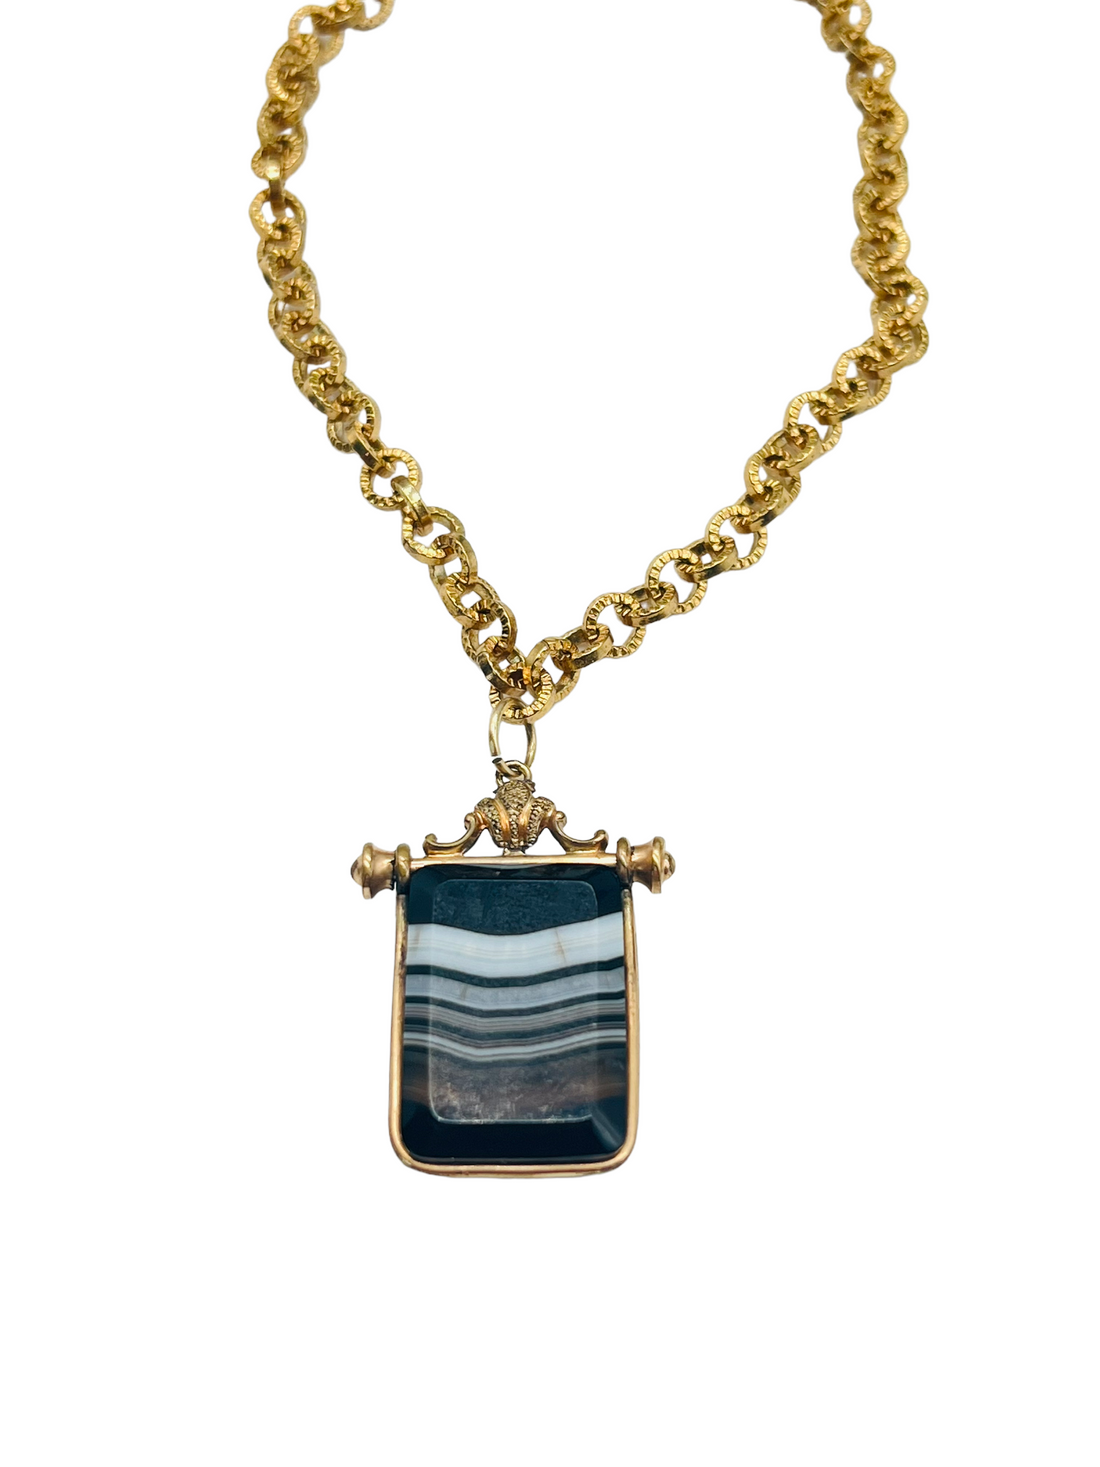 Victorian Banded Agate Necklace on Gold Chain.